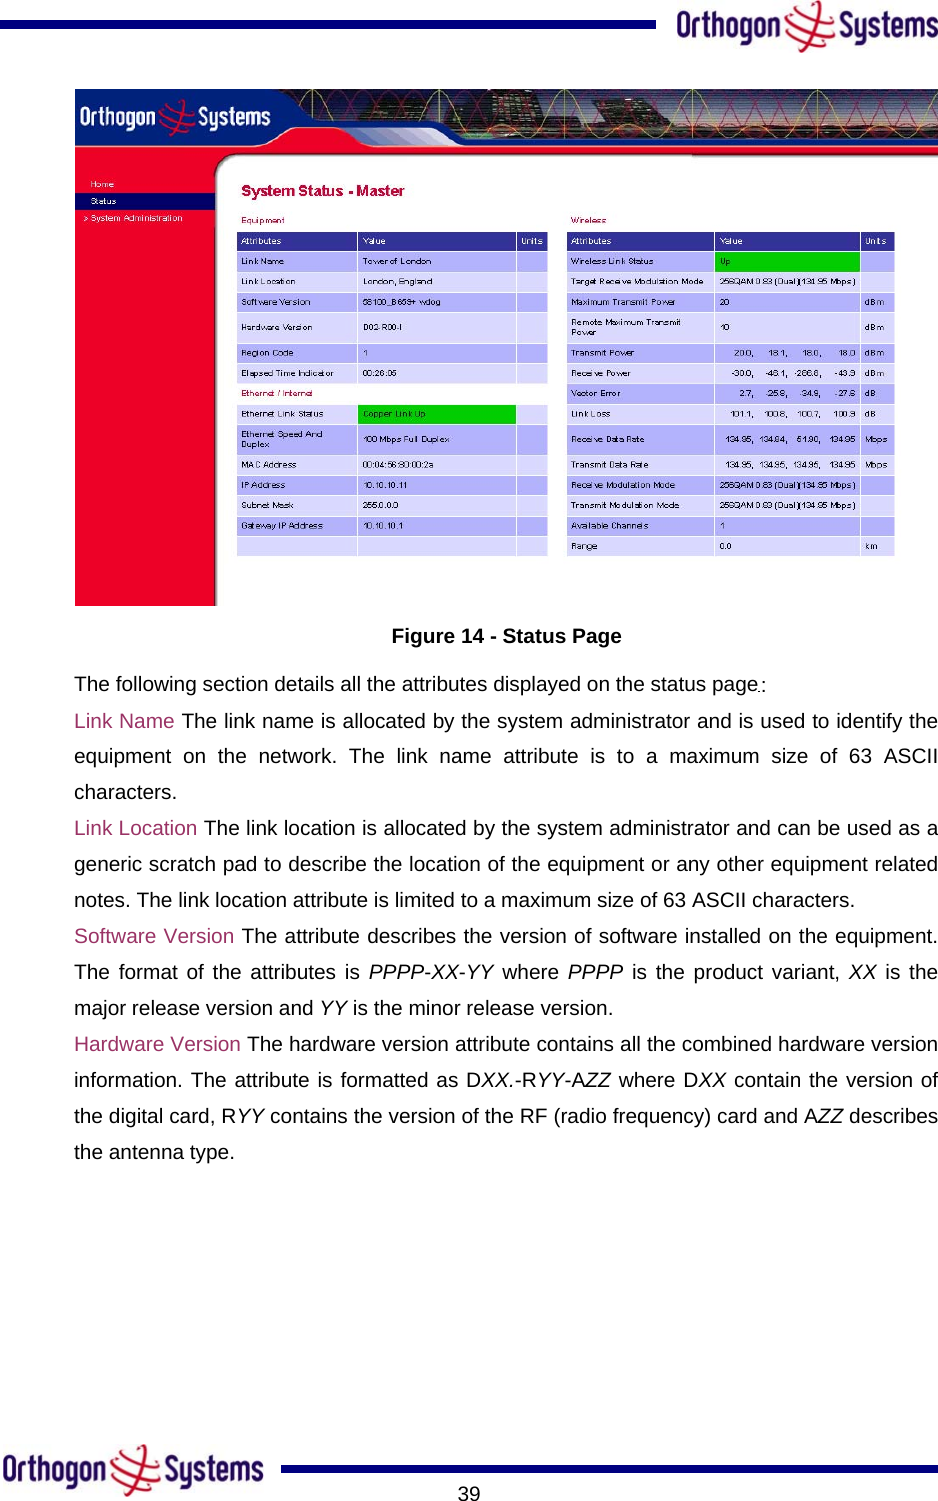       39 Figure 14 - Status Page The following section details all the attributes displayed on the status page: Link Name The link name is allocated by the system administrator and is used to identify the equipment on the network. The link name attribute is to a maximum size of 63 ASCII characters. Link Location The link location is allocated by the system administrator and can be used as a generic scratch pad to describe the location of the equipment or any other equipment related notes. The link location attribute is limited to a maximum size of 63 ASCII characters. Software Version The attribute describes the version of software installed on the equipment. The format of the attributes is PPPP-XX-YY where PPPP is the product variant, XX is the major release version and YY is the minor release version.  Hardware Version The hardware version attribute contains all the combined hardware version information. The attribute is formatted as DXX.-RYY-AZZ where DXX contain the version of the digital card, RYY contains the version of the RF (radio frequency) card and AZZ describes the antenna type.  